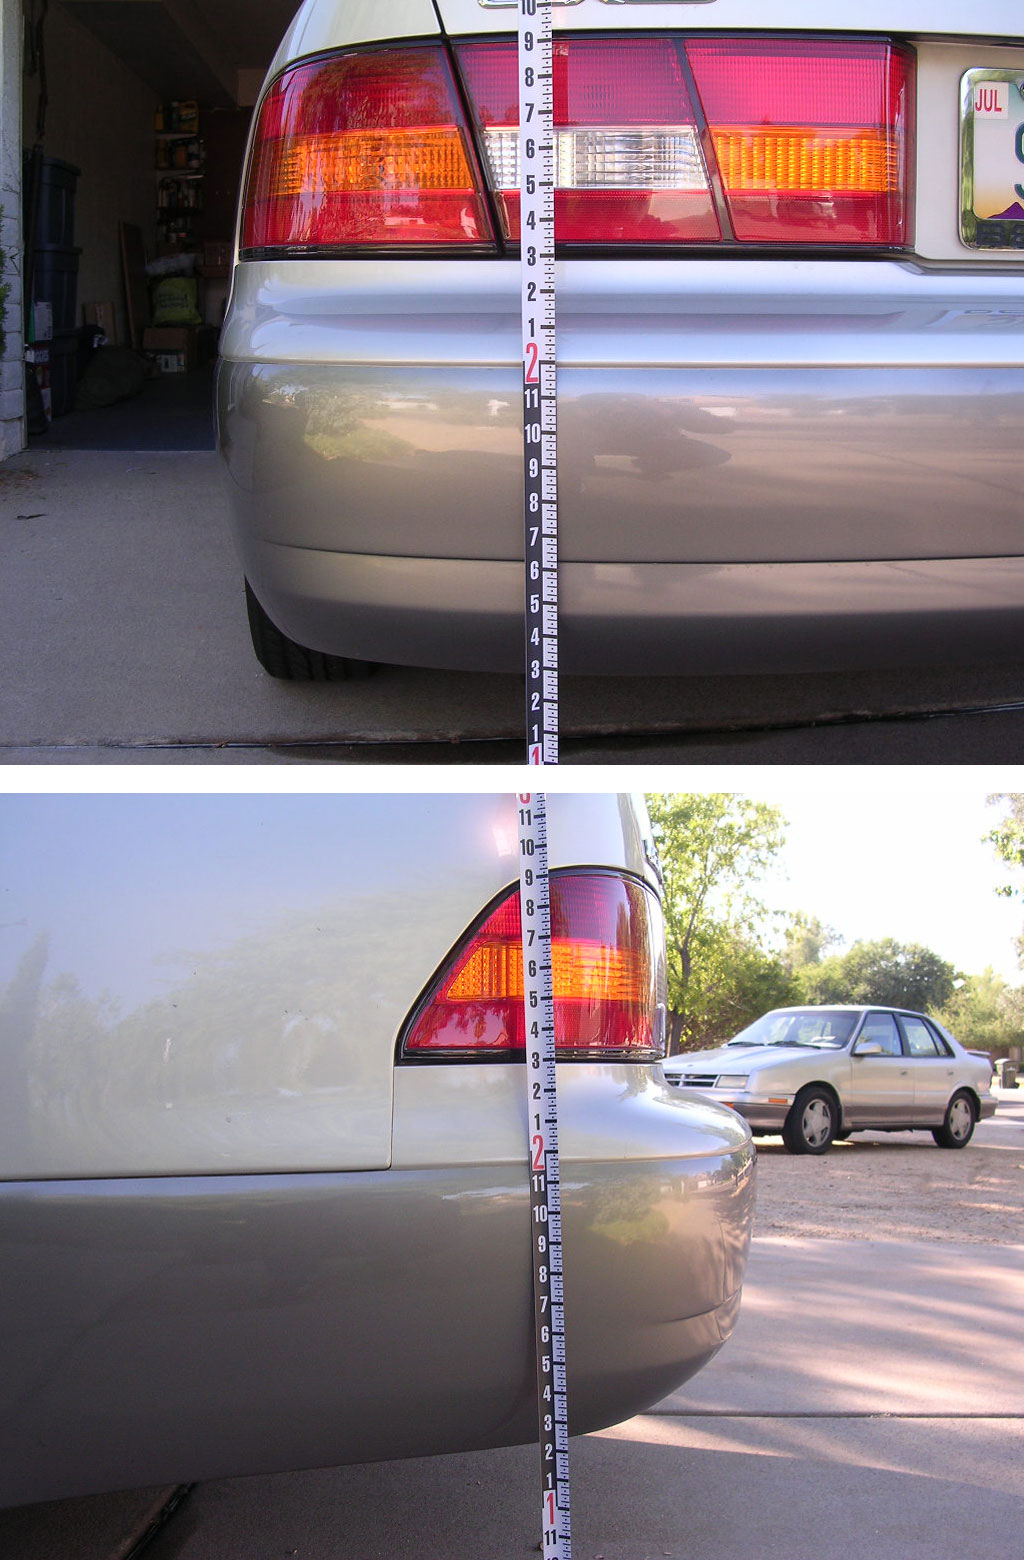 Example of proper bumper photography and measurement for low velocity impact analysis